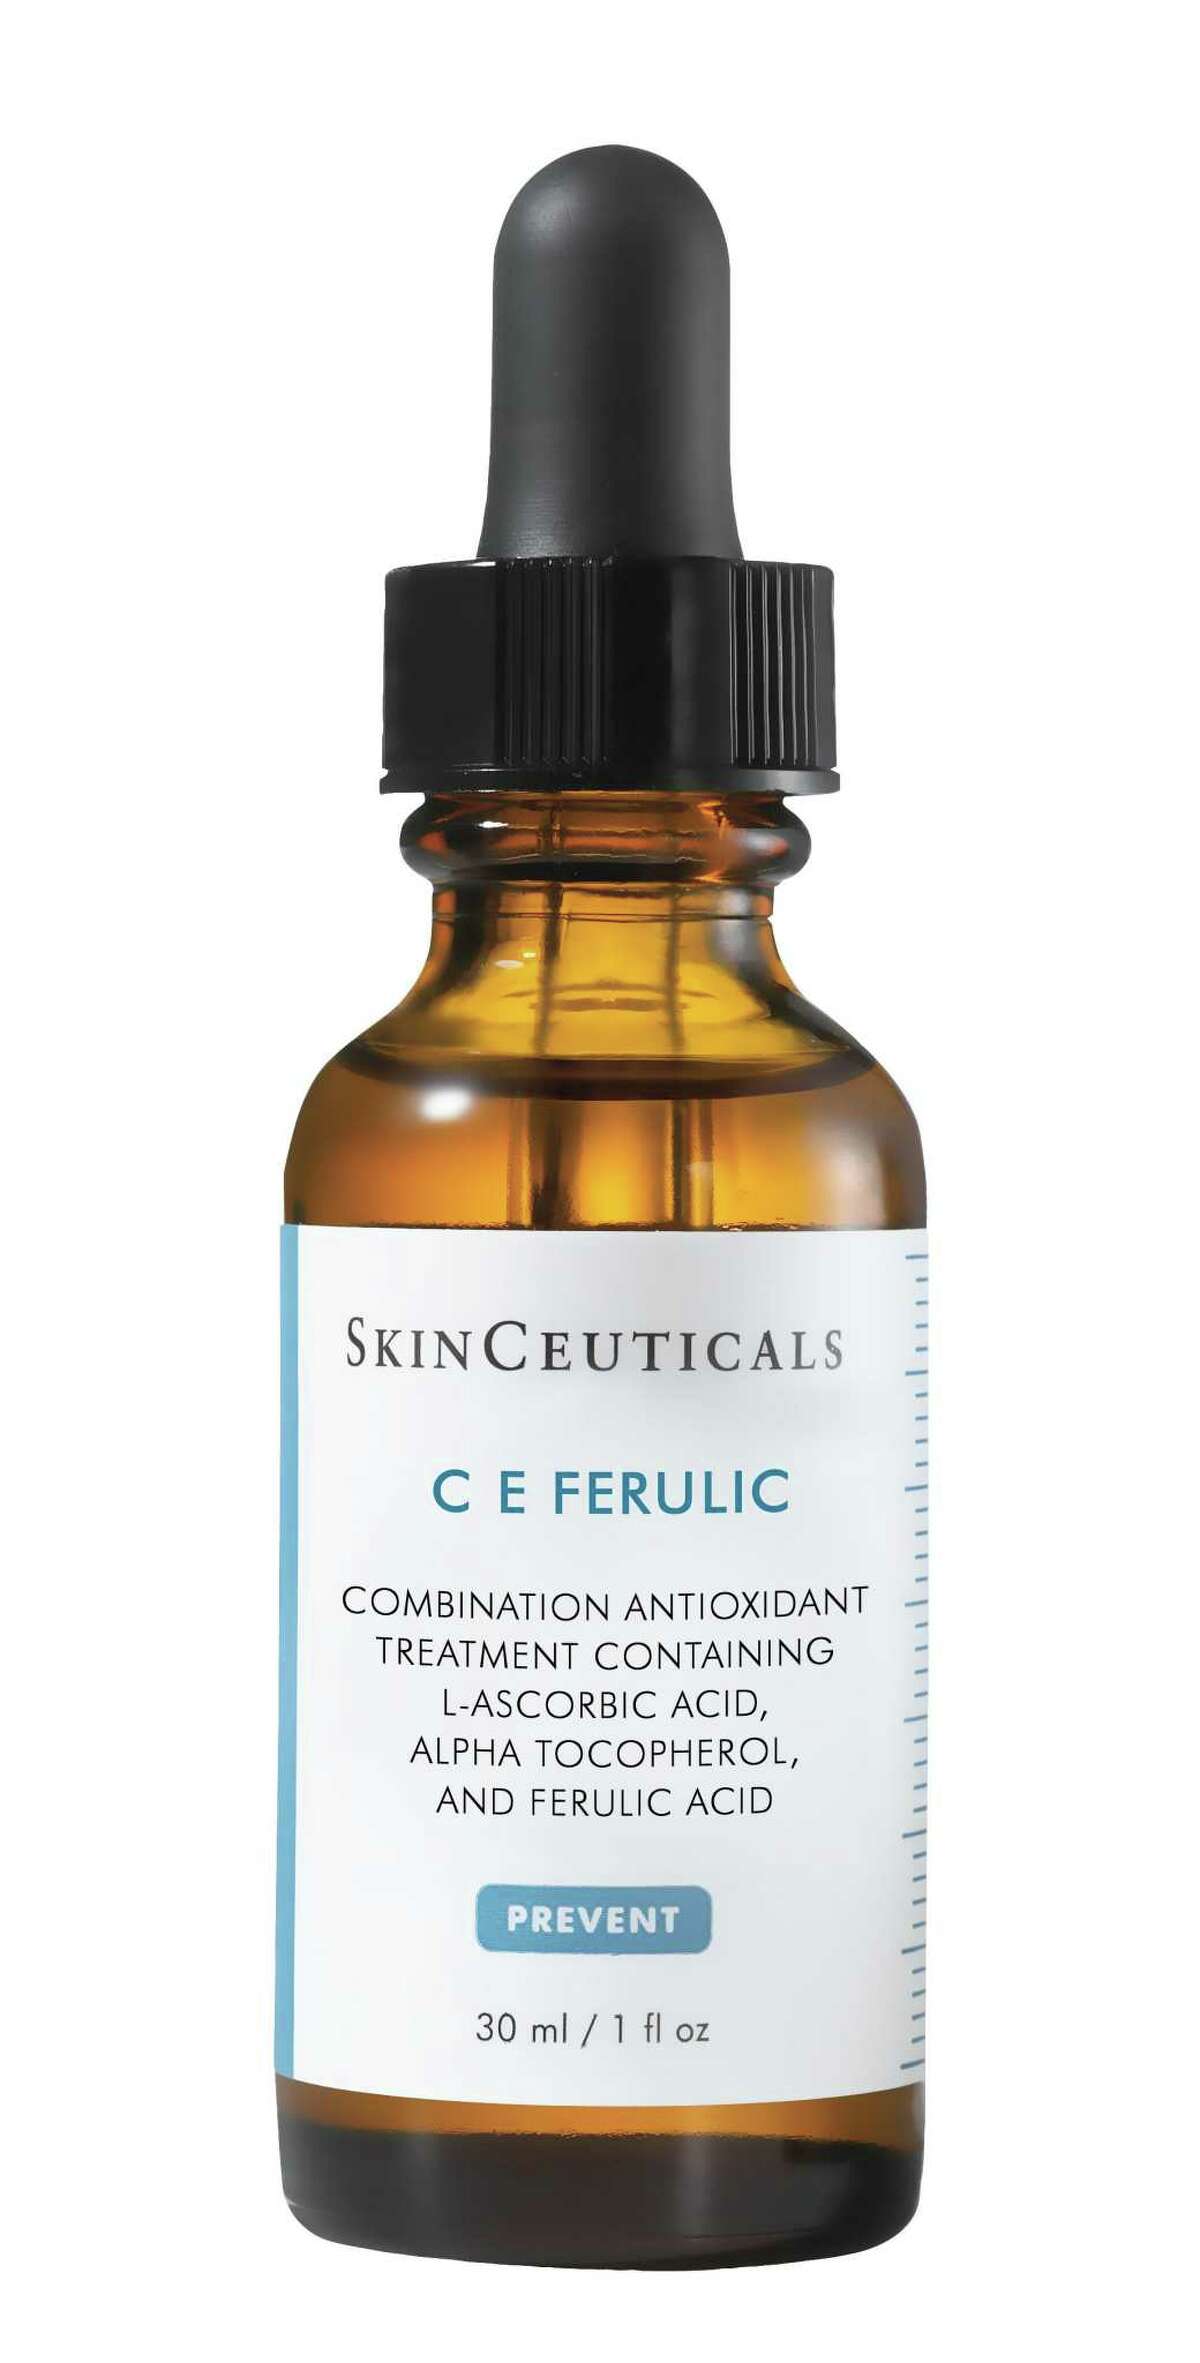 SkinCeuticals C E Ferulic: Intense vitamin C-stoked serum combats discolored and aging skin by attacking free radical damage generated by UV and HEV light; $166 at skinceuticals.com, dermstore.com and clinical spas such as Village Dermatology, 7575 San Felipe.